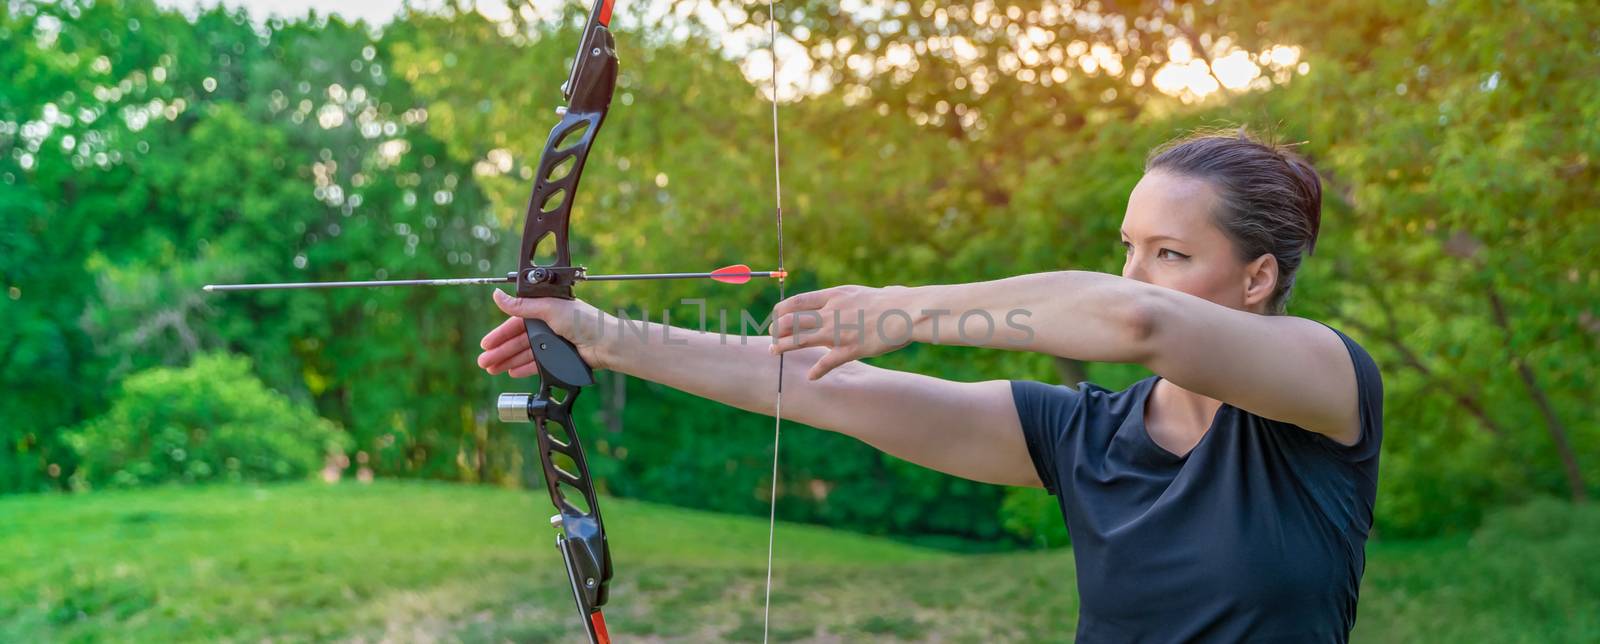 archery in nature, young woman aiming an arrow at a target.